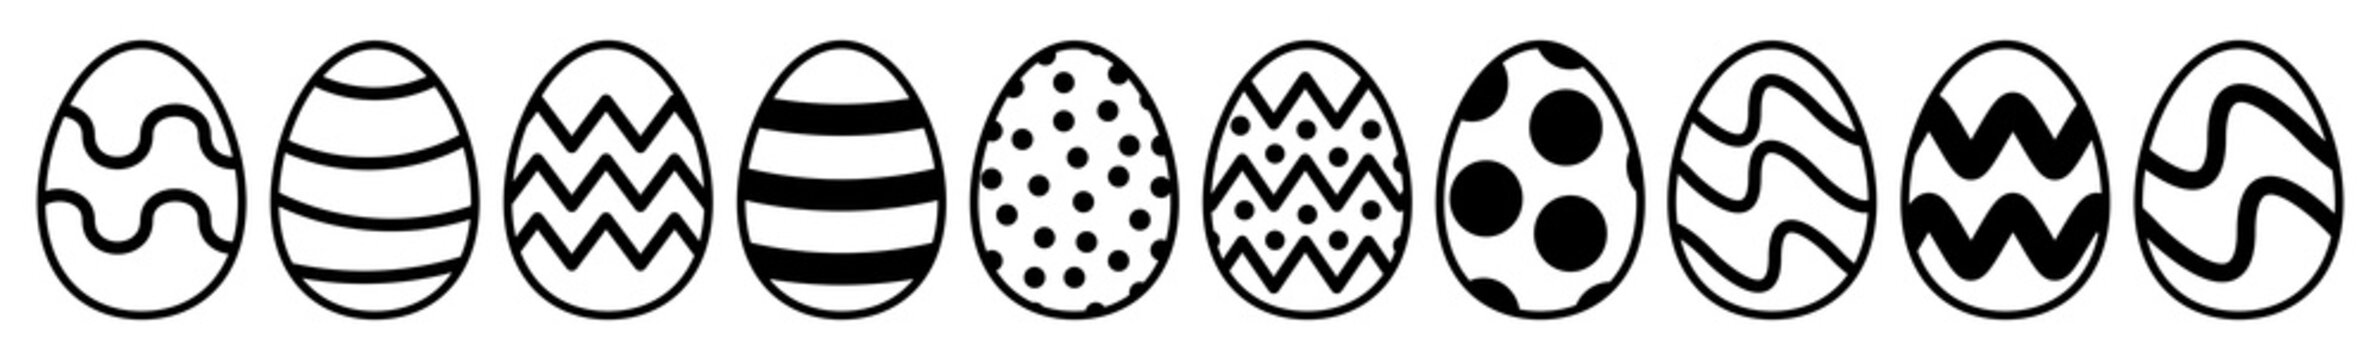 Easter Egg Icon Black | Painted Eggs Illustration | Happy Easter Hunt Symbol | Holiday Logo | April Spring Sign | Isolated | Variations